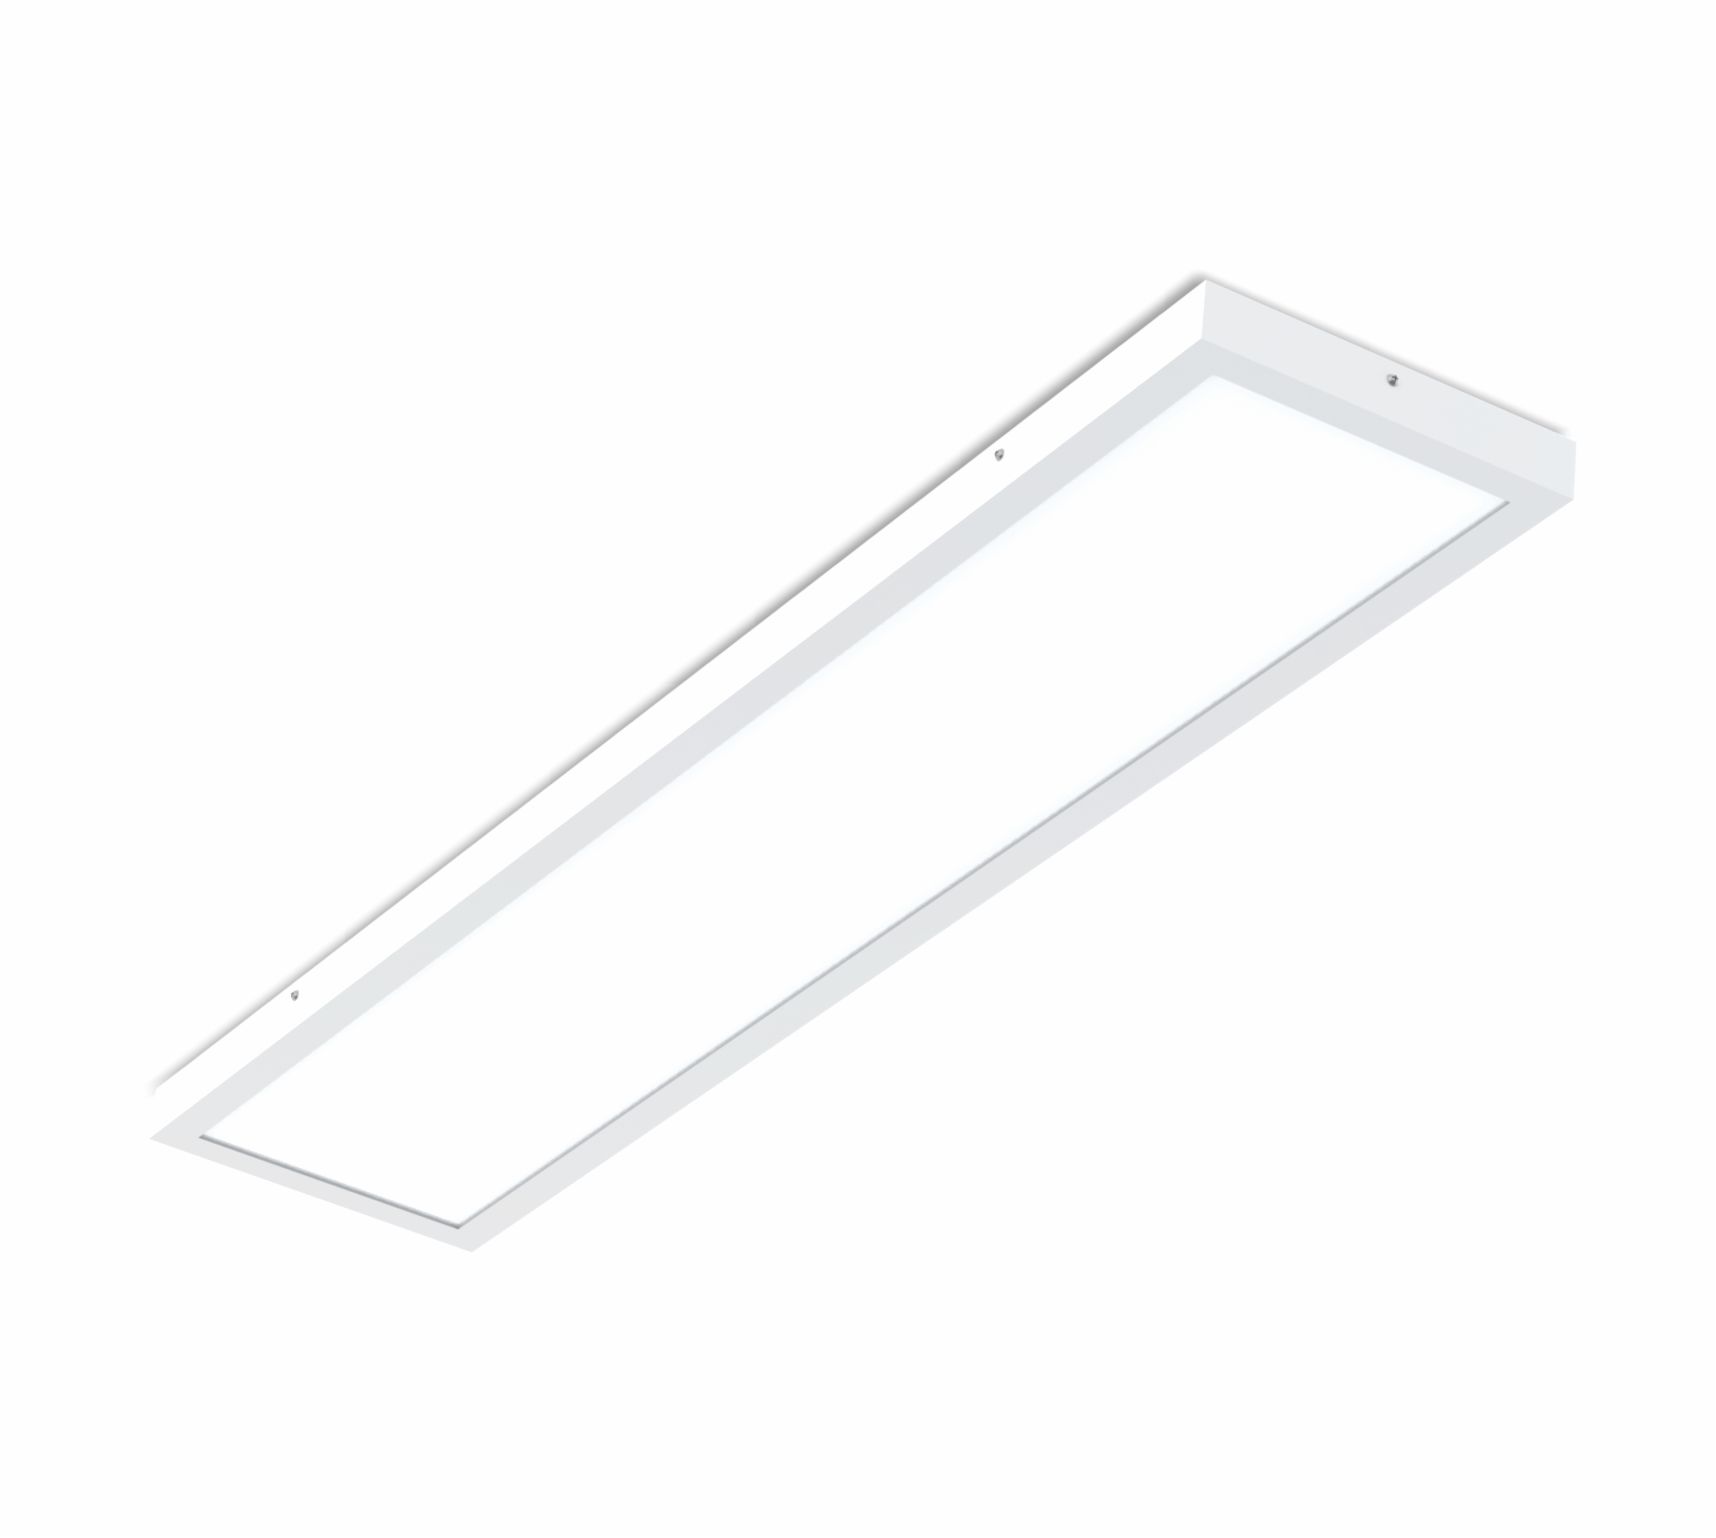  PAINELSLIMLED-RT-S-120-24-65-3C <span>(caixa)</span><br/>